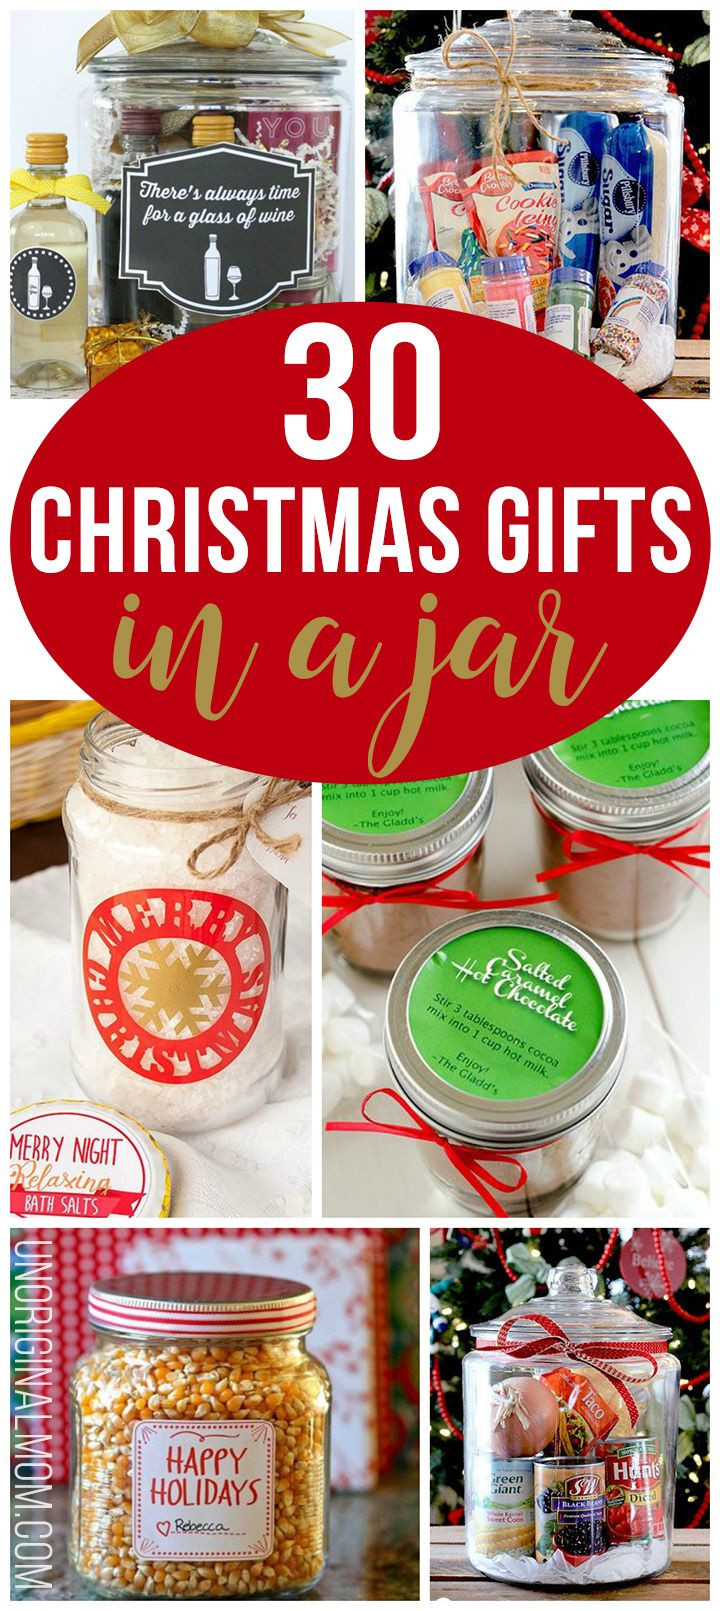 Christmas Gift Ideas On A Budget
 30 Christmas Gifts in a Jar